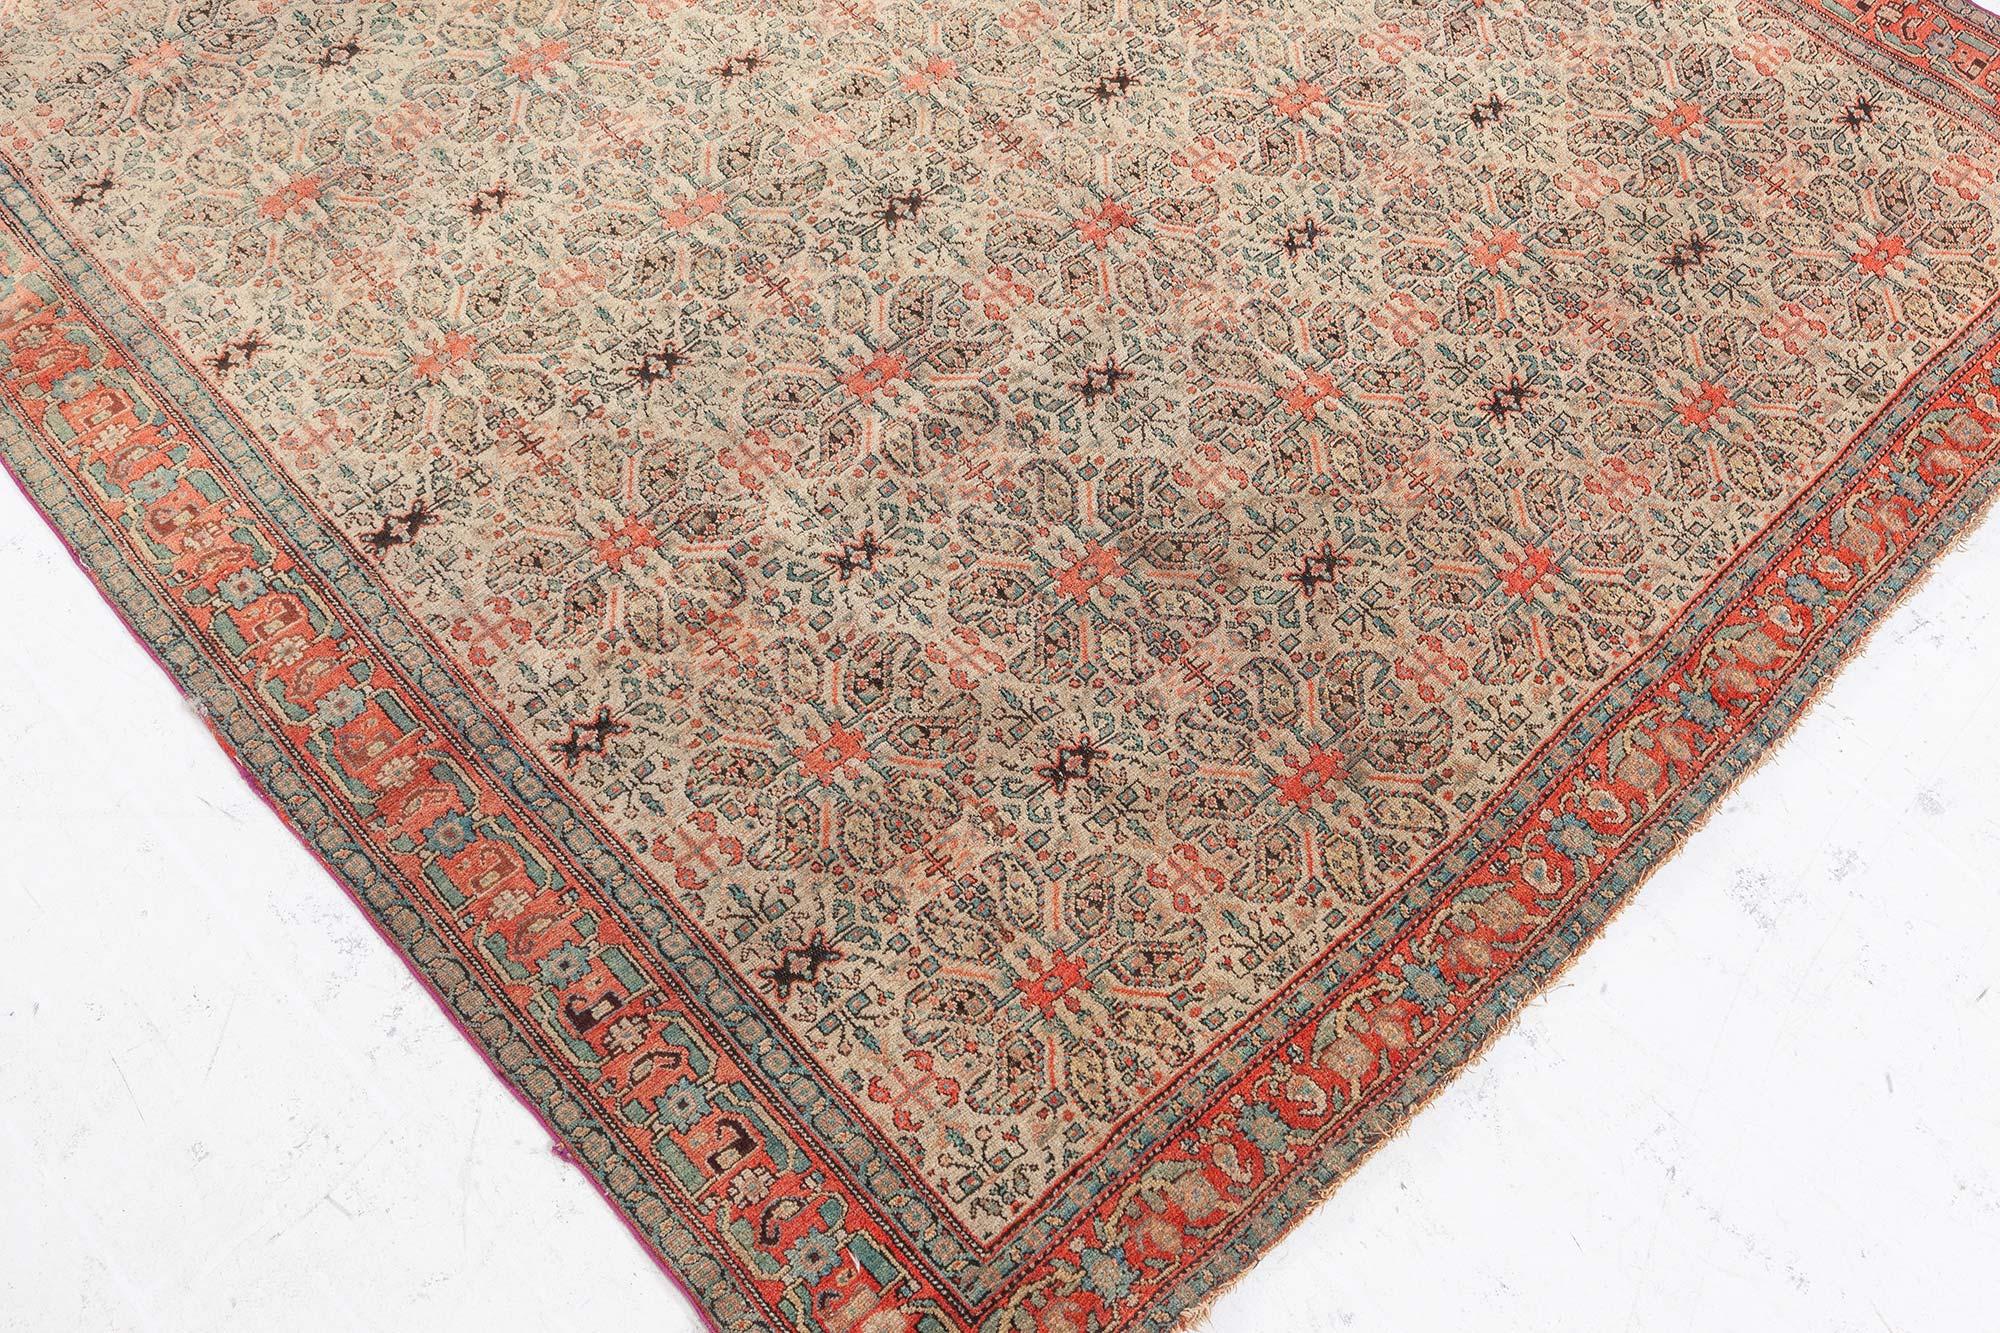 Authentic 19th Century Persian Senneh Botanic Rug In Good Condition For Sale In New York, NY